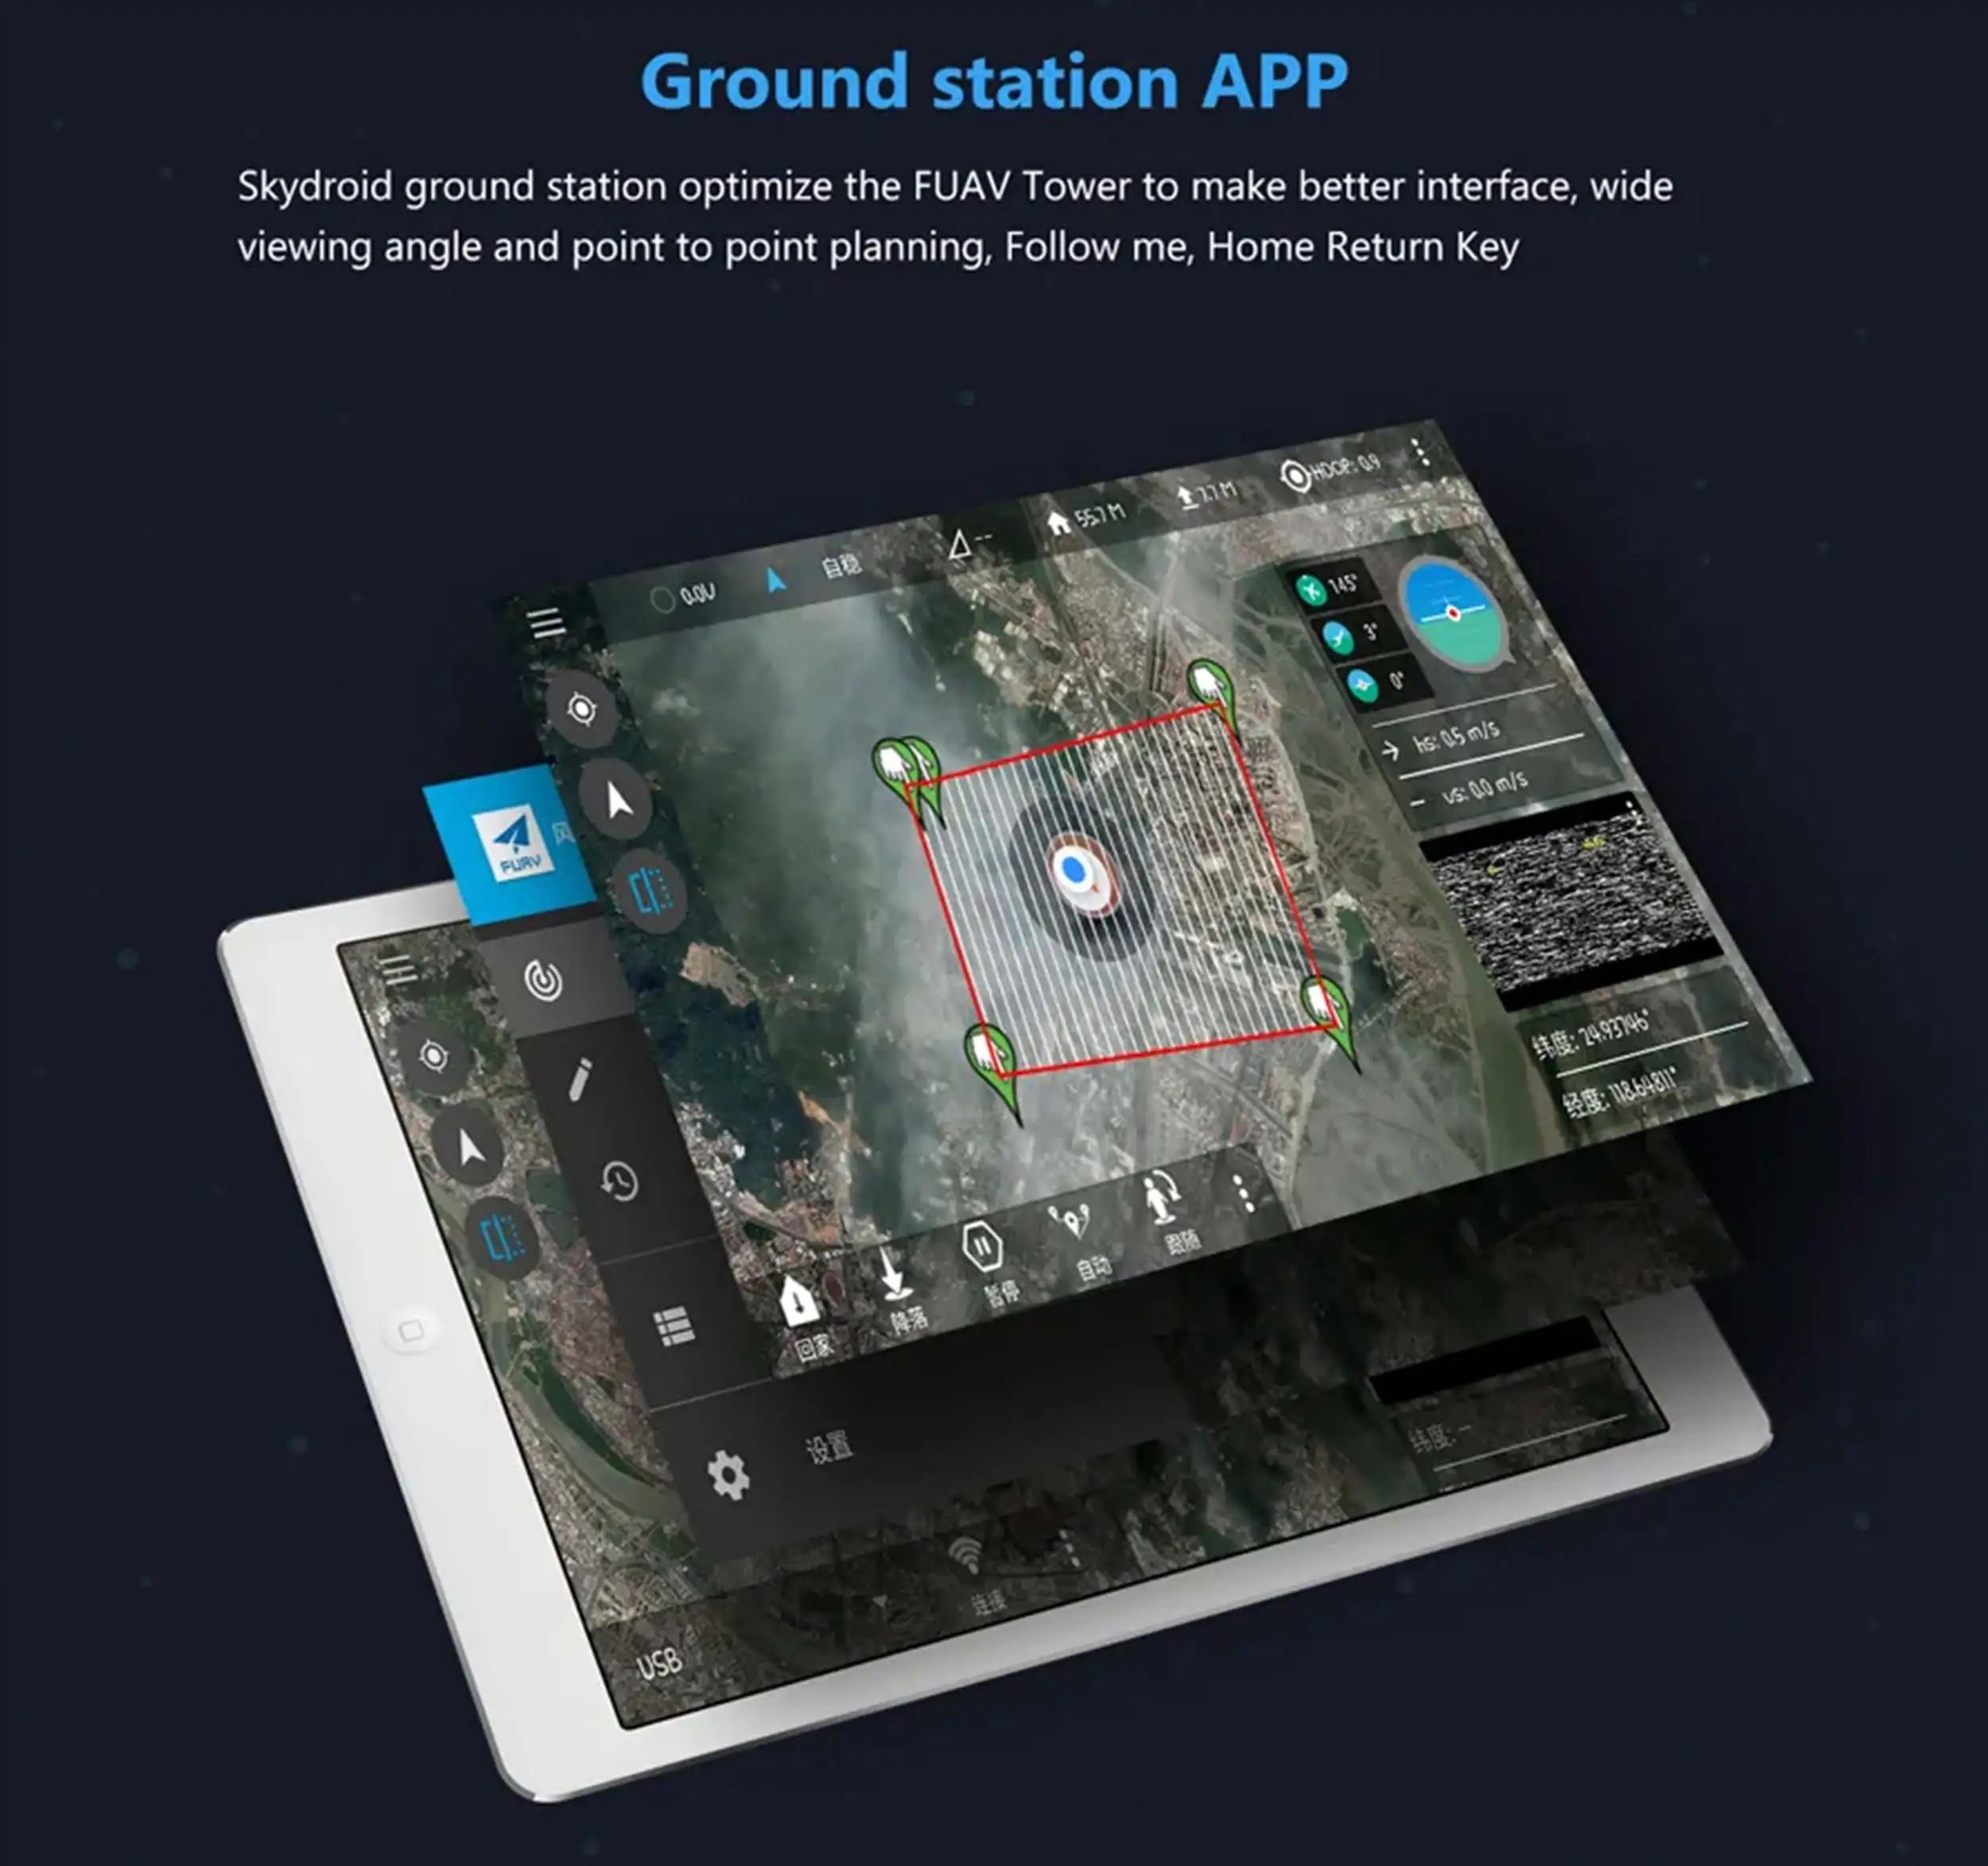 Skydroid M12L, Skydroid's app optimizes ground stations with user-friendly interface, wide view, and planning features.